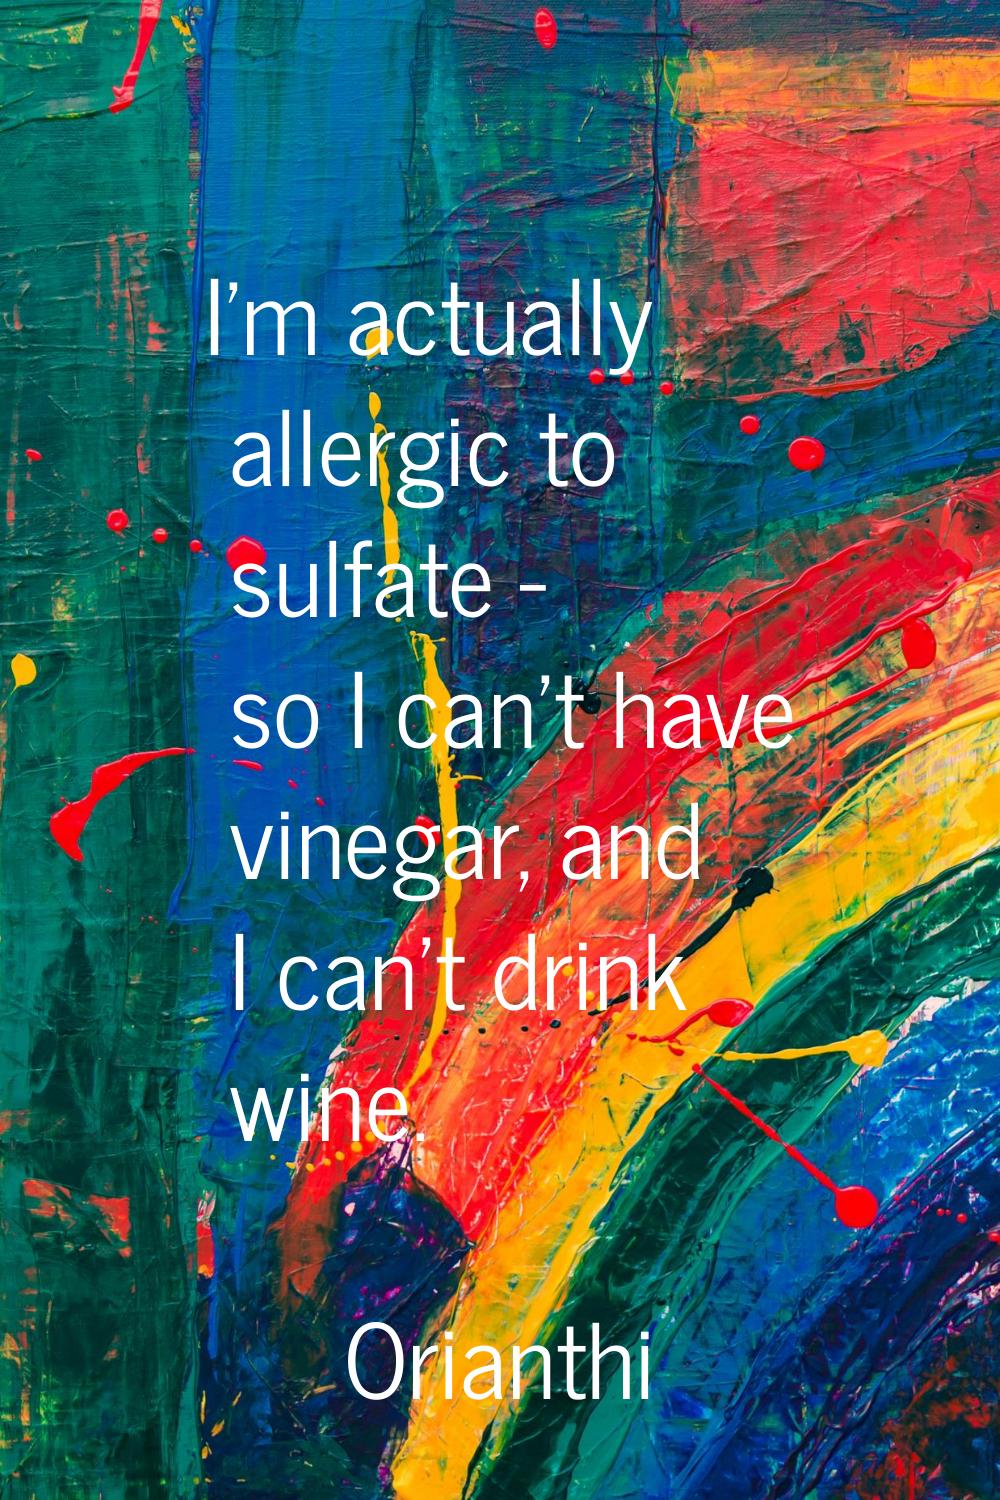 I'm actually allergic to sulfate - so I can't have vinegar, and I can't drink wine.